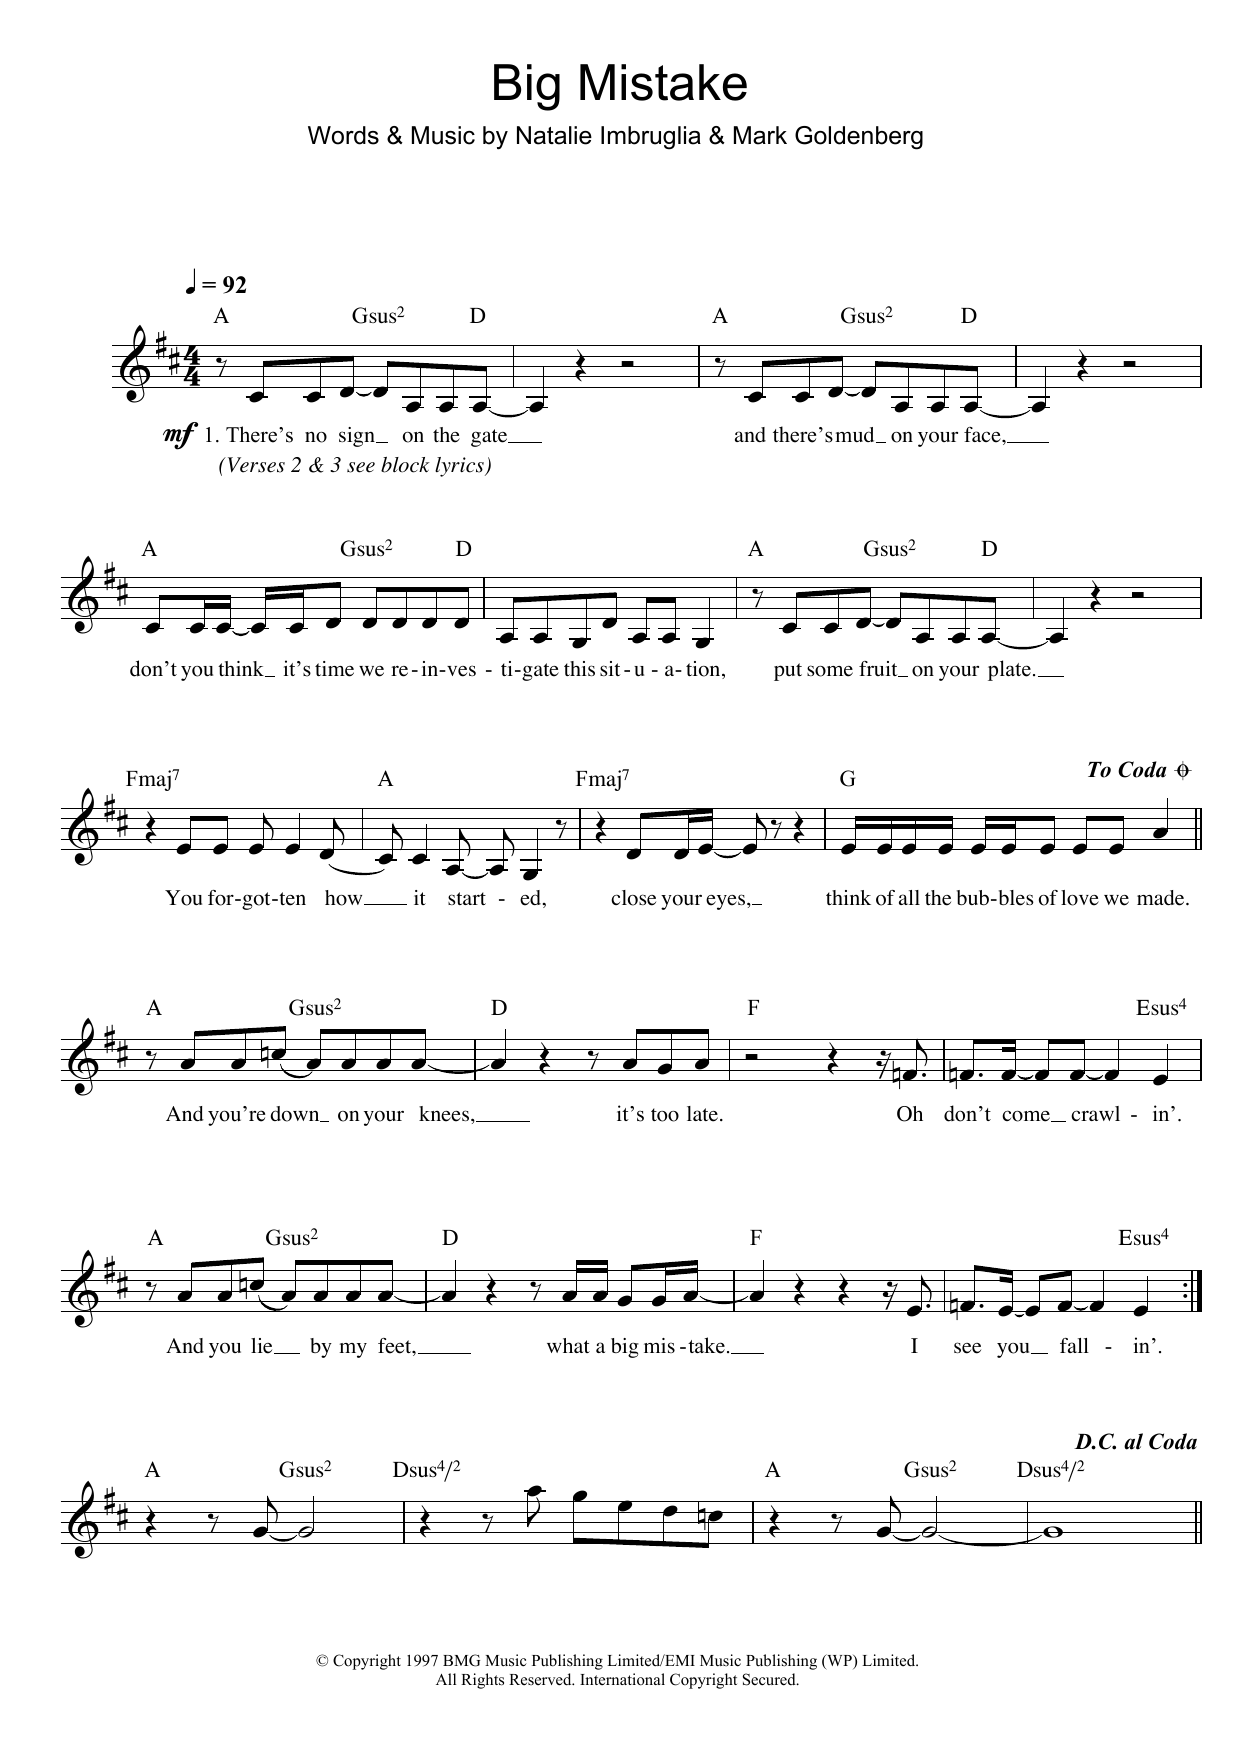 Natalie Imbruglia Big Mistake sheet music preview music notes and score for Piano, Vocal & Guitar including 4 page(s)